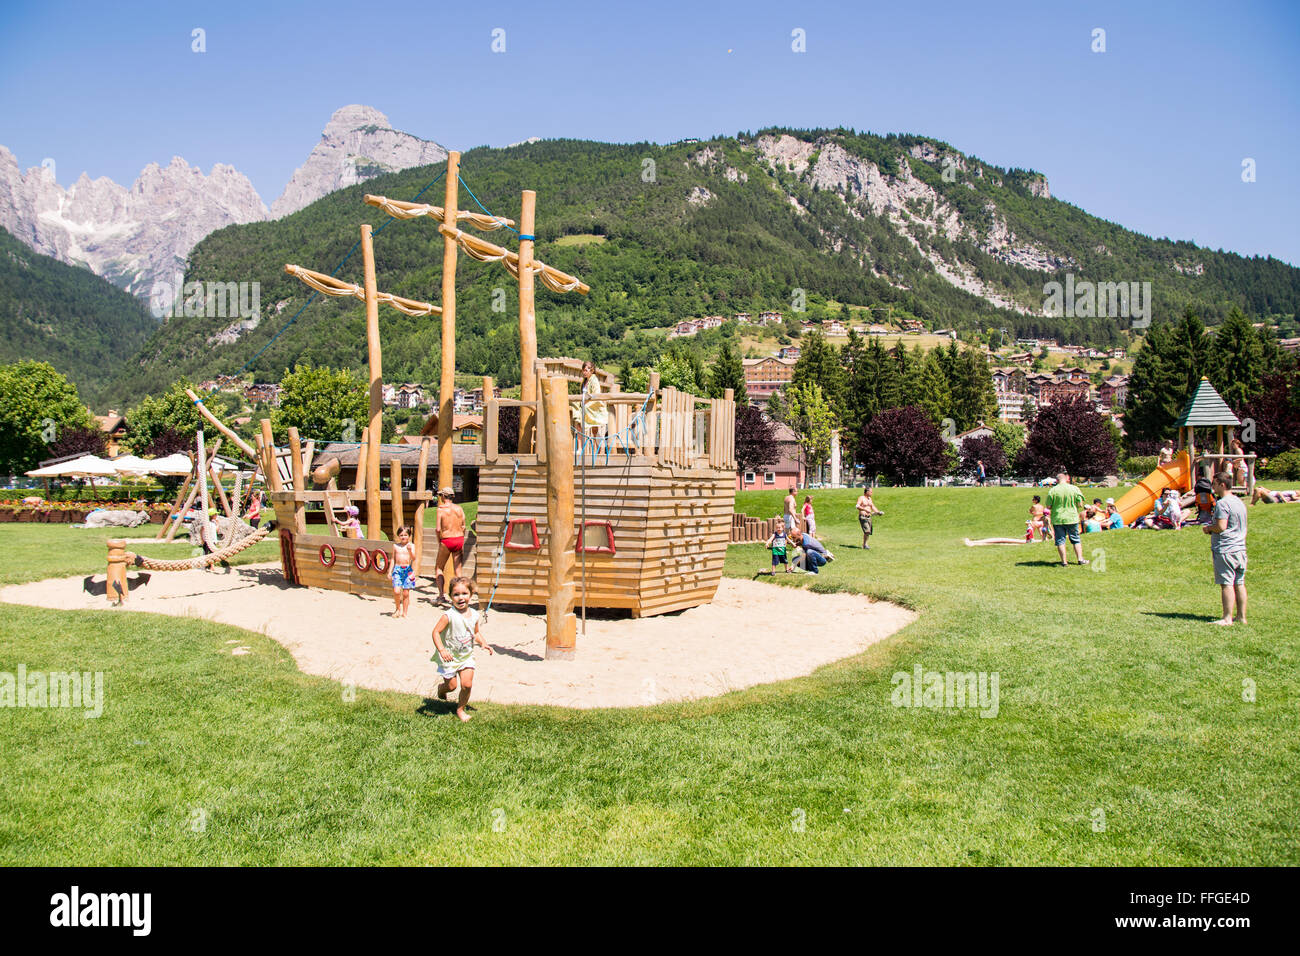 Molveno, Italy - July 10, 2015: Playground structures with natural wood on the banks of Lake Molveno surrounded by the Alps. Stock Photo